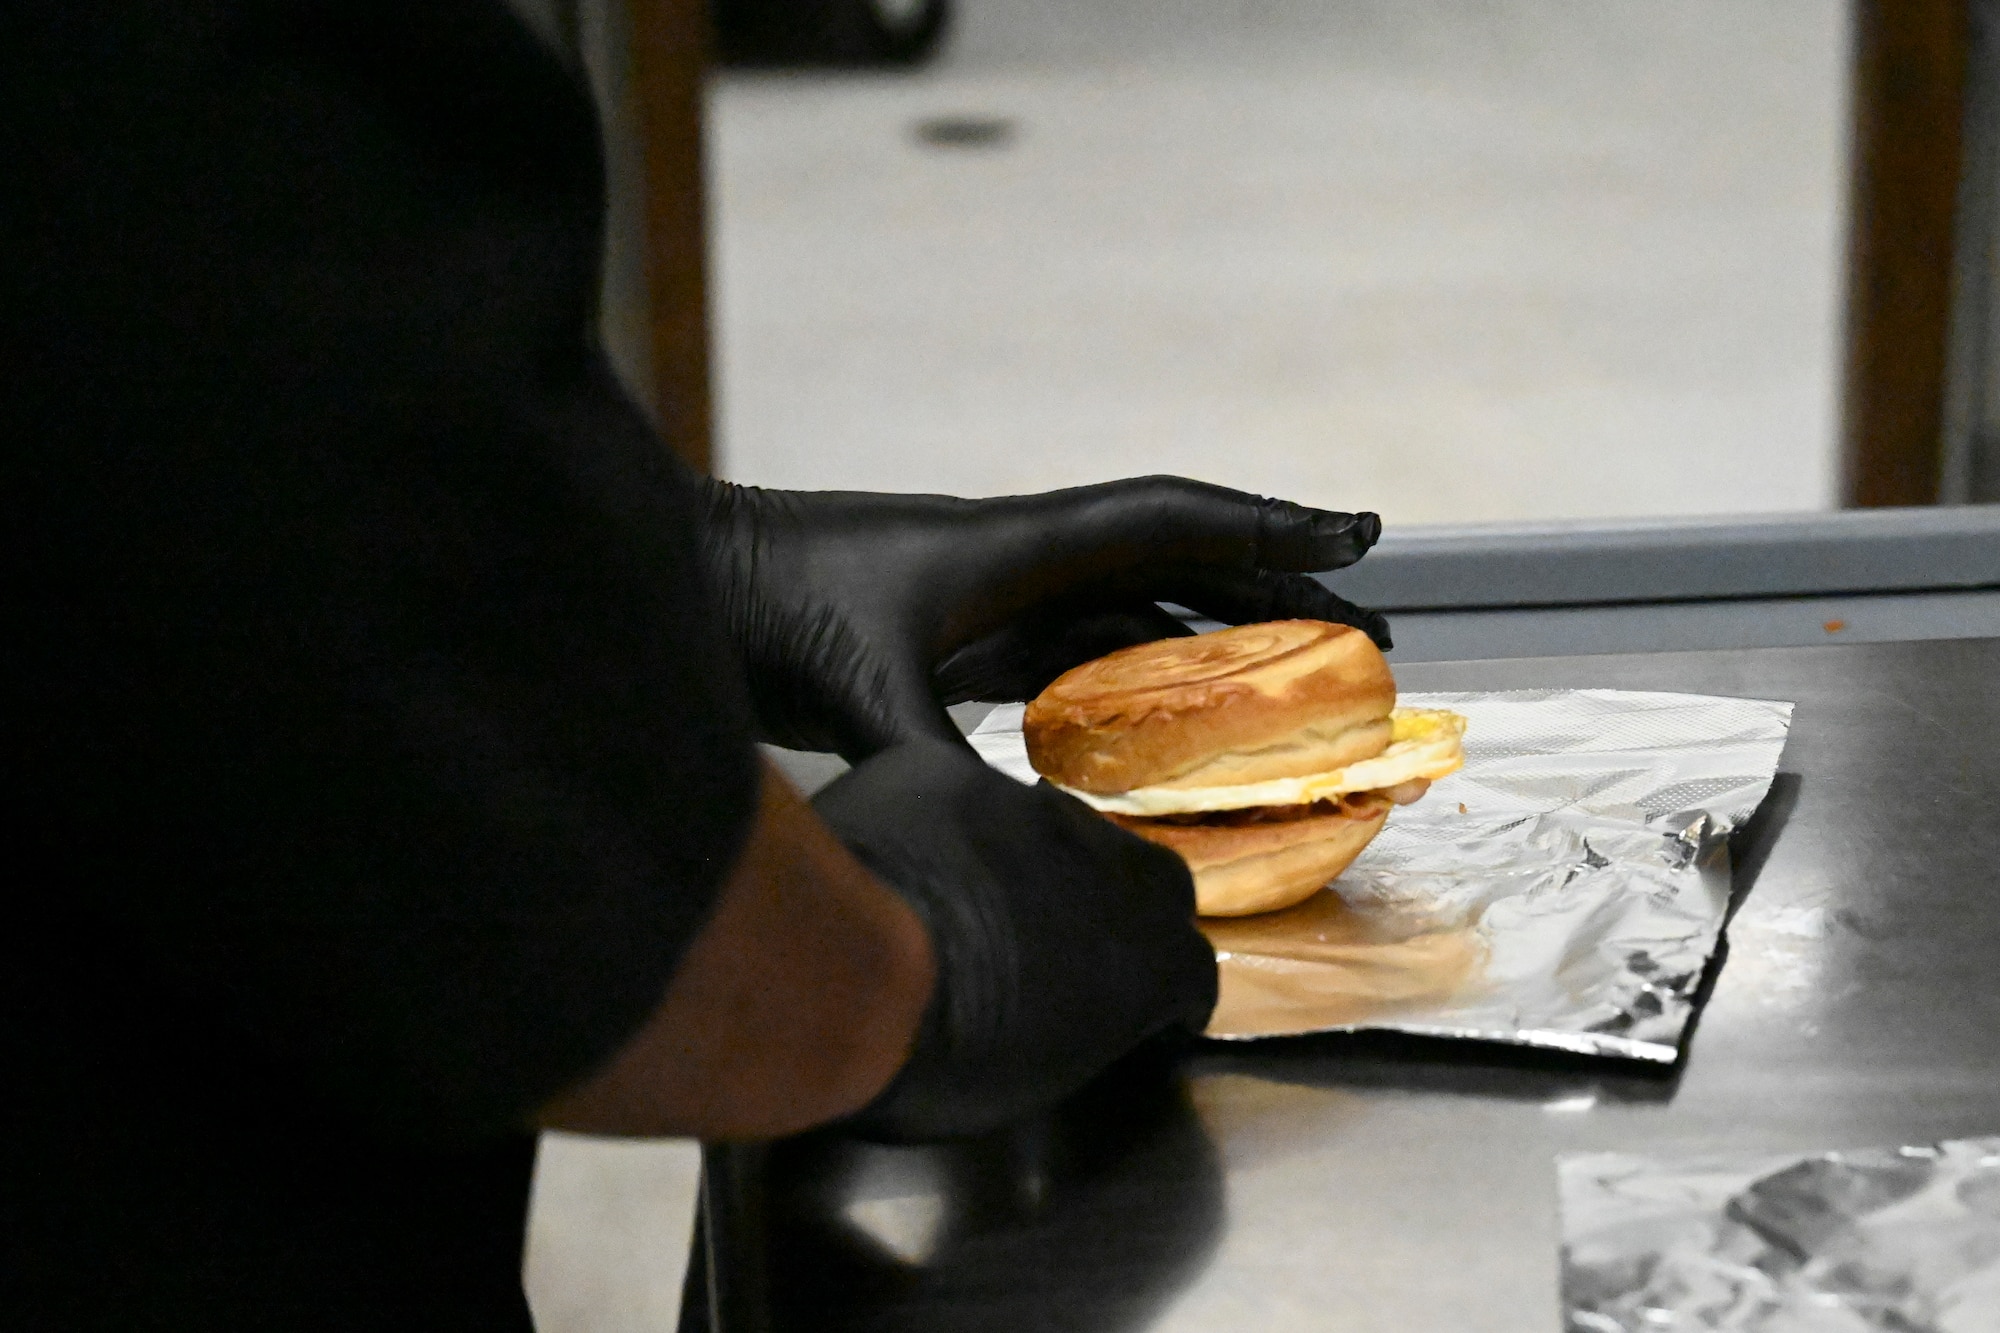 A 49th Force Support Squadron Airman from the 49er Cafe prepares a breakfast sandwich at Holloman Air Force Base, New Mexico, March 21, 2024. The 49er Cafe, located within Club Holloman, launched a new breakfast and lunch menu with a selection of salads, sandwiches, wraps, and grab-and-go items that provide everyone with easy and healthful options. (U.S. Air Force photo by Airman 1st Class Michelle Ferrari)